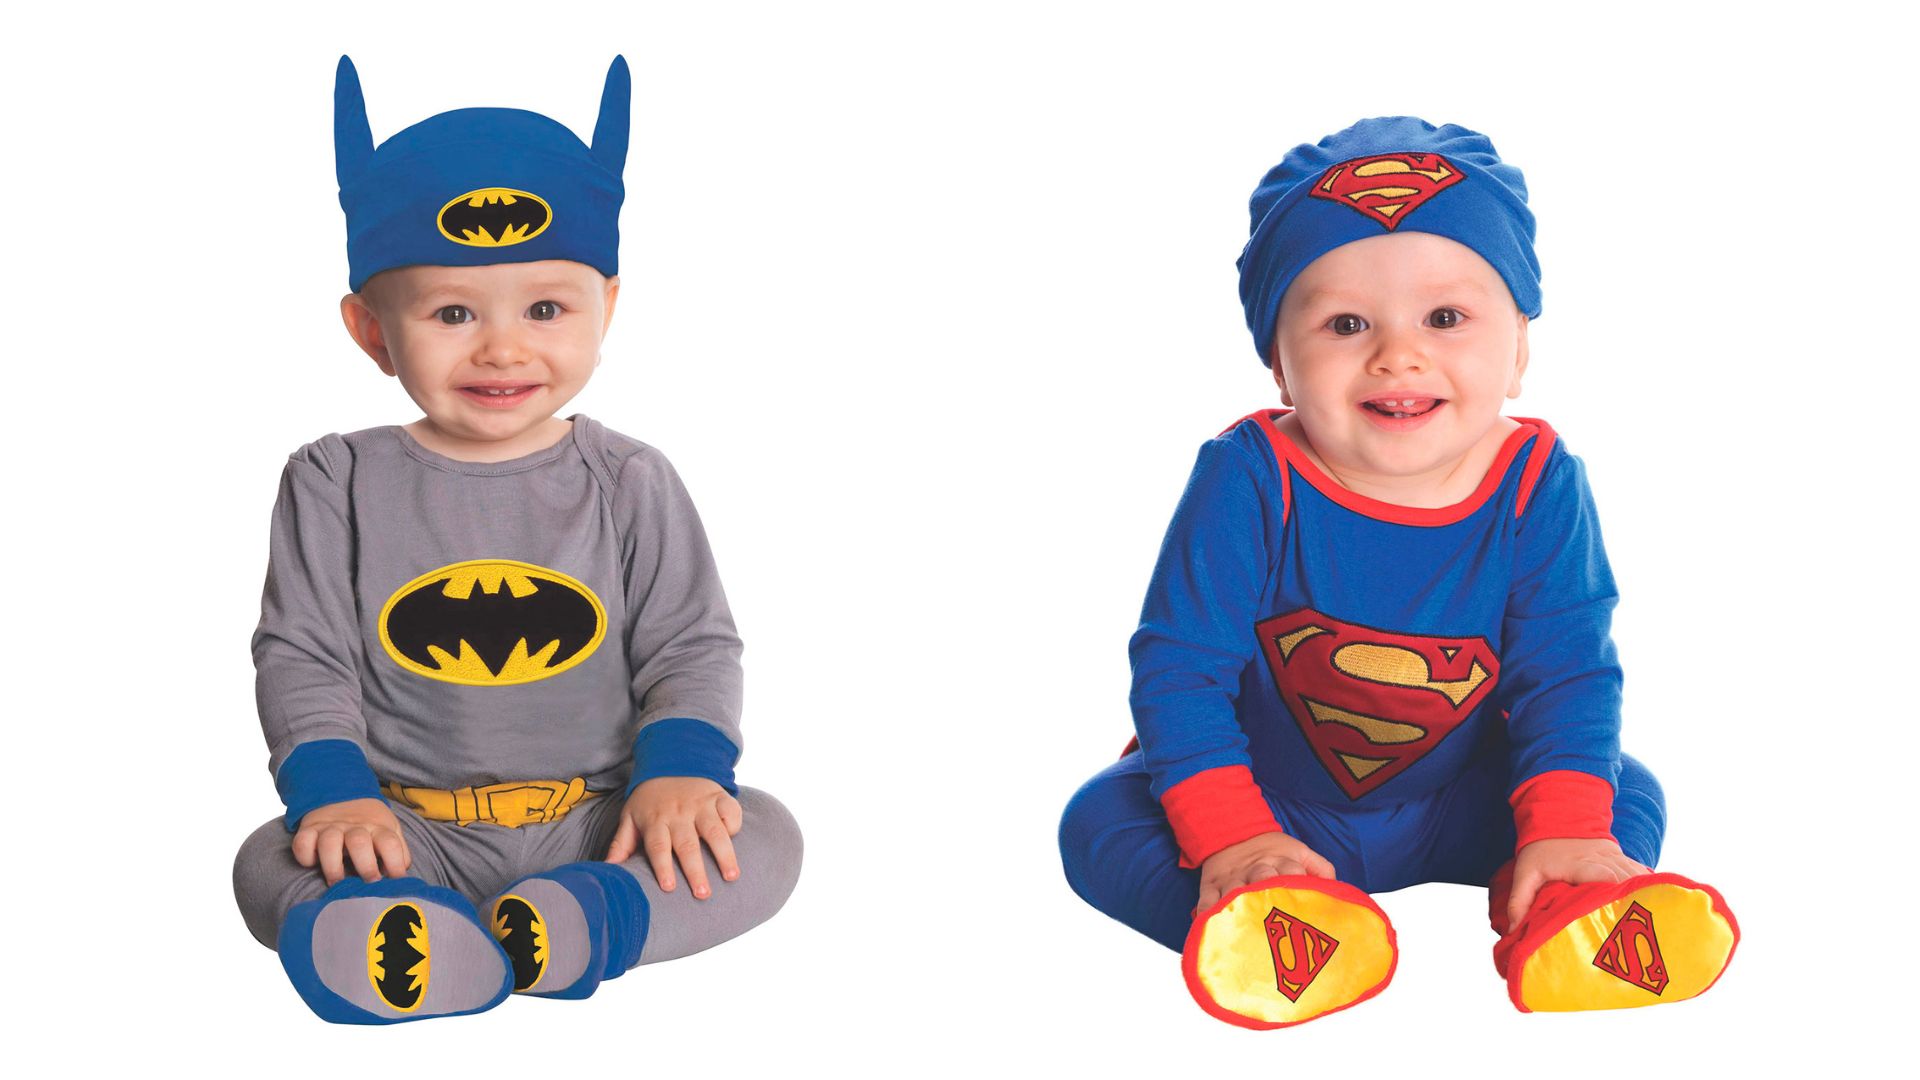 Batman and Superman costumes for babies & toddlers